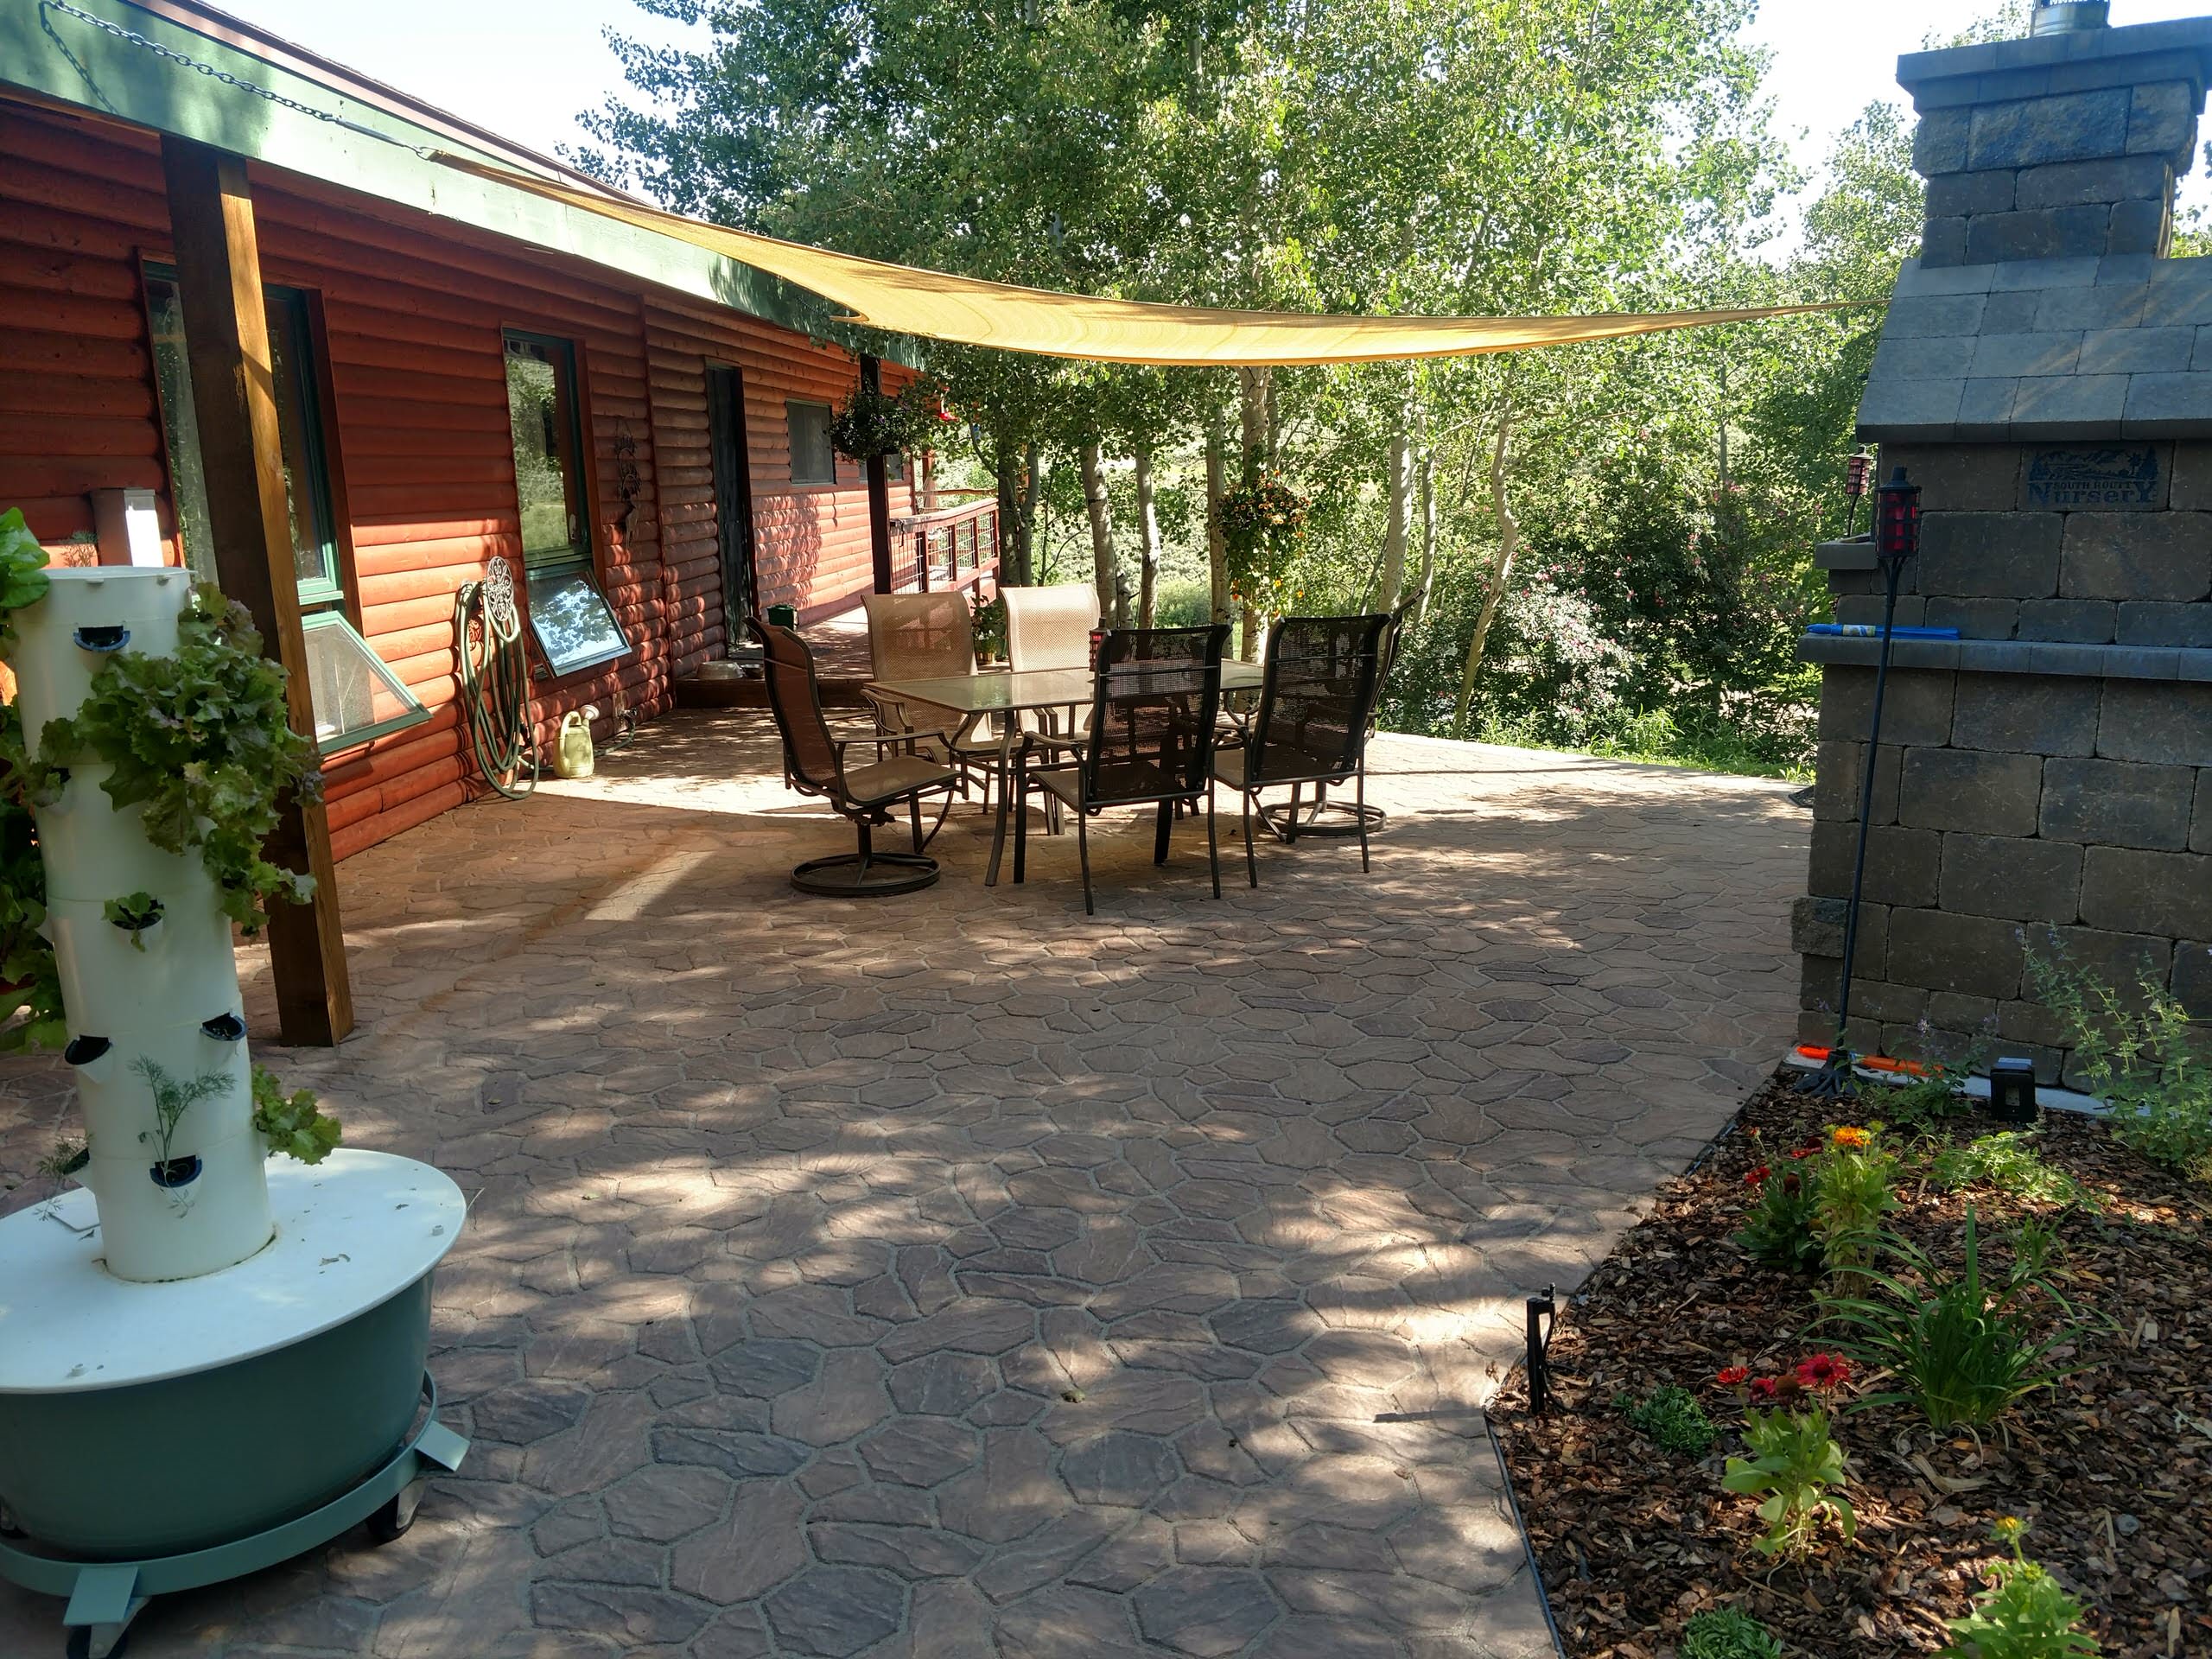 Facelift to an old patio.